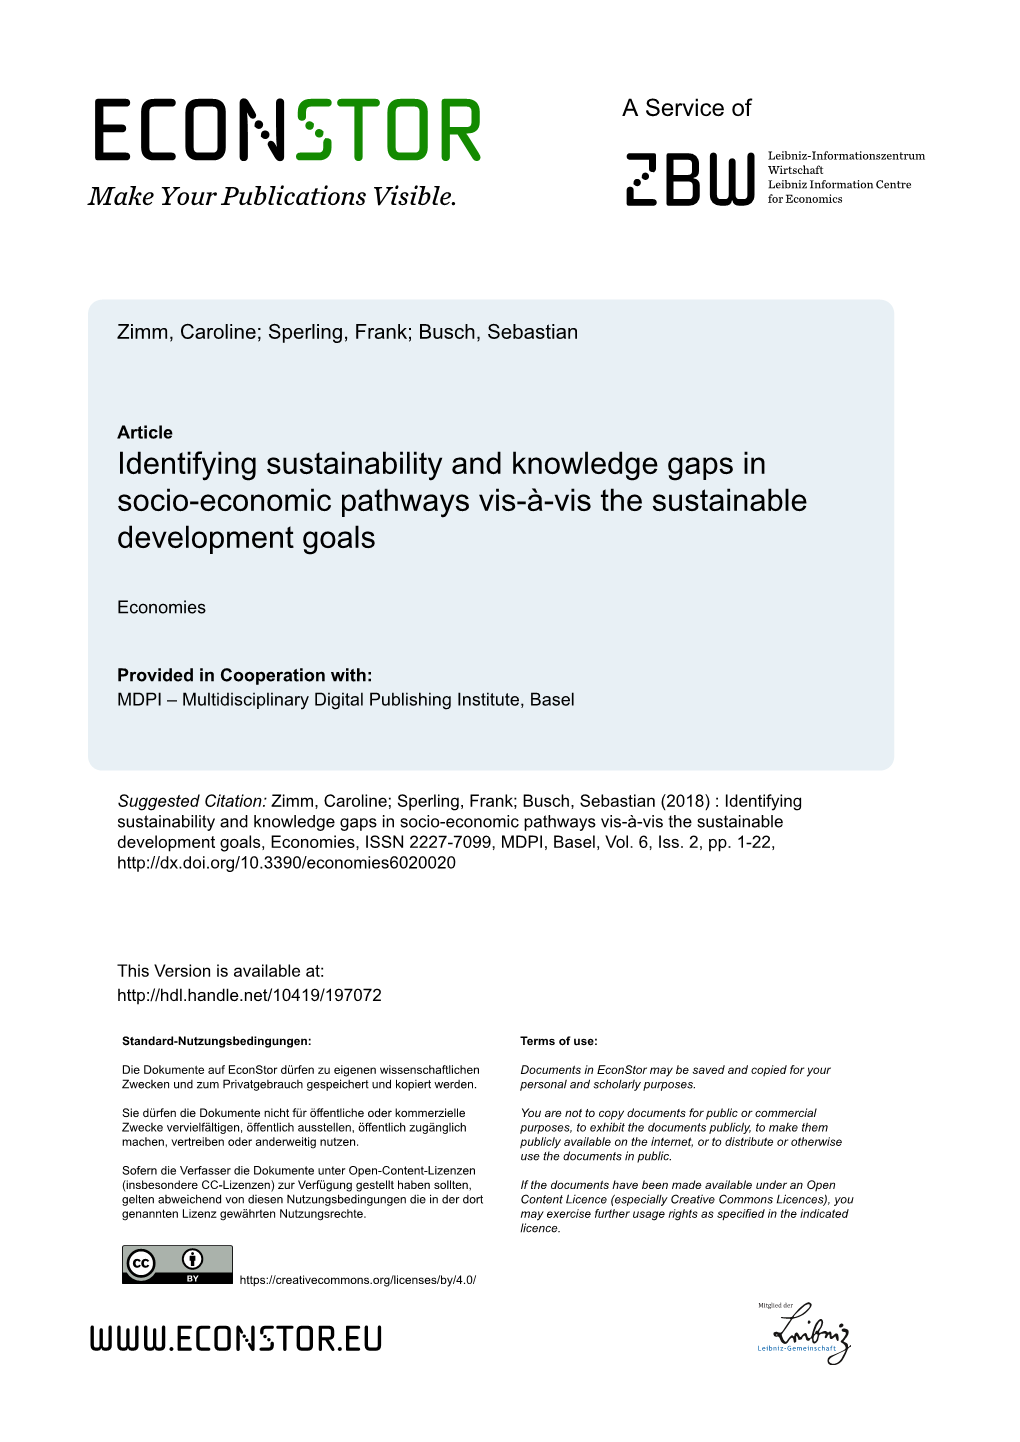 Identifying Sustainability and Knowledge Gaps in Socio-Economic Pathways Vis-À-Vis the Sustainable Development Goals